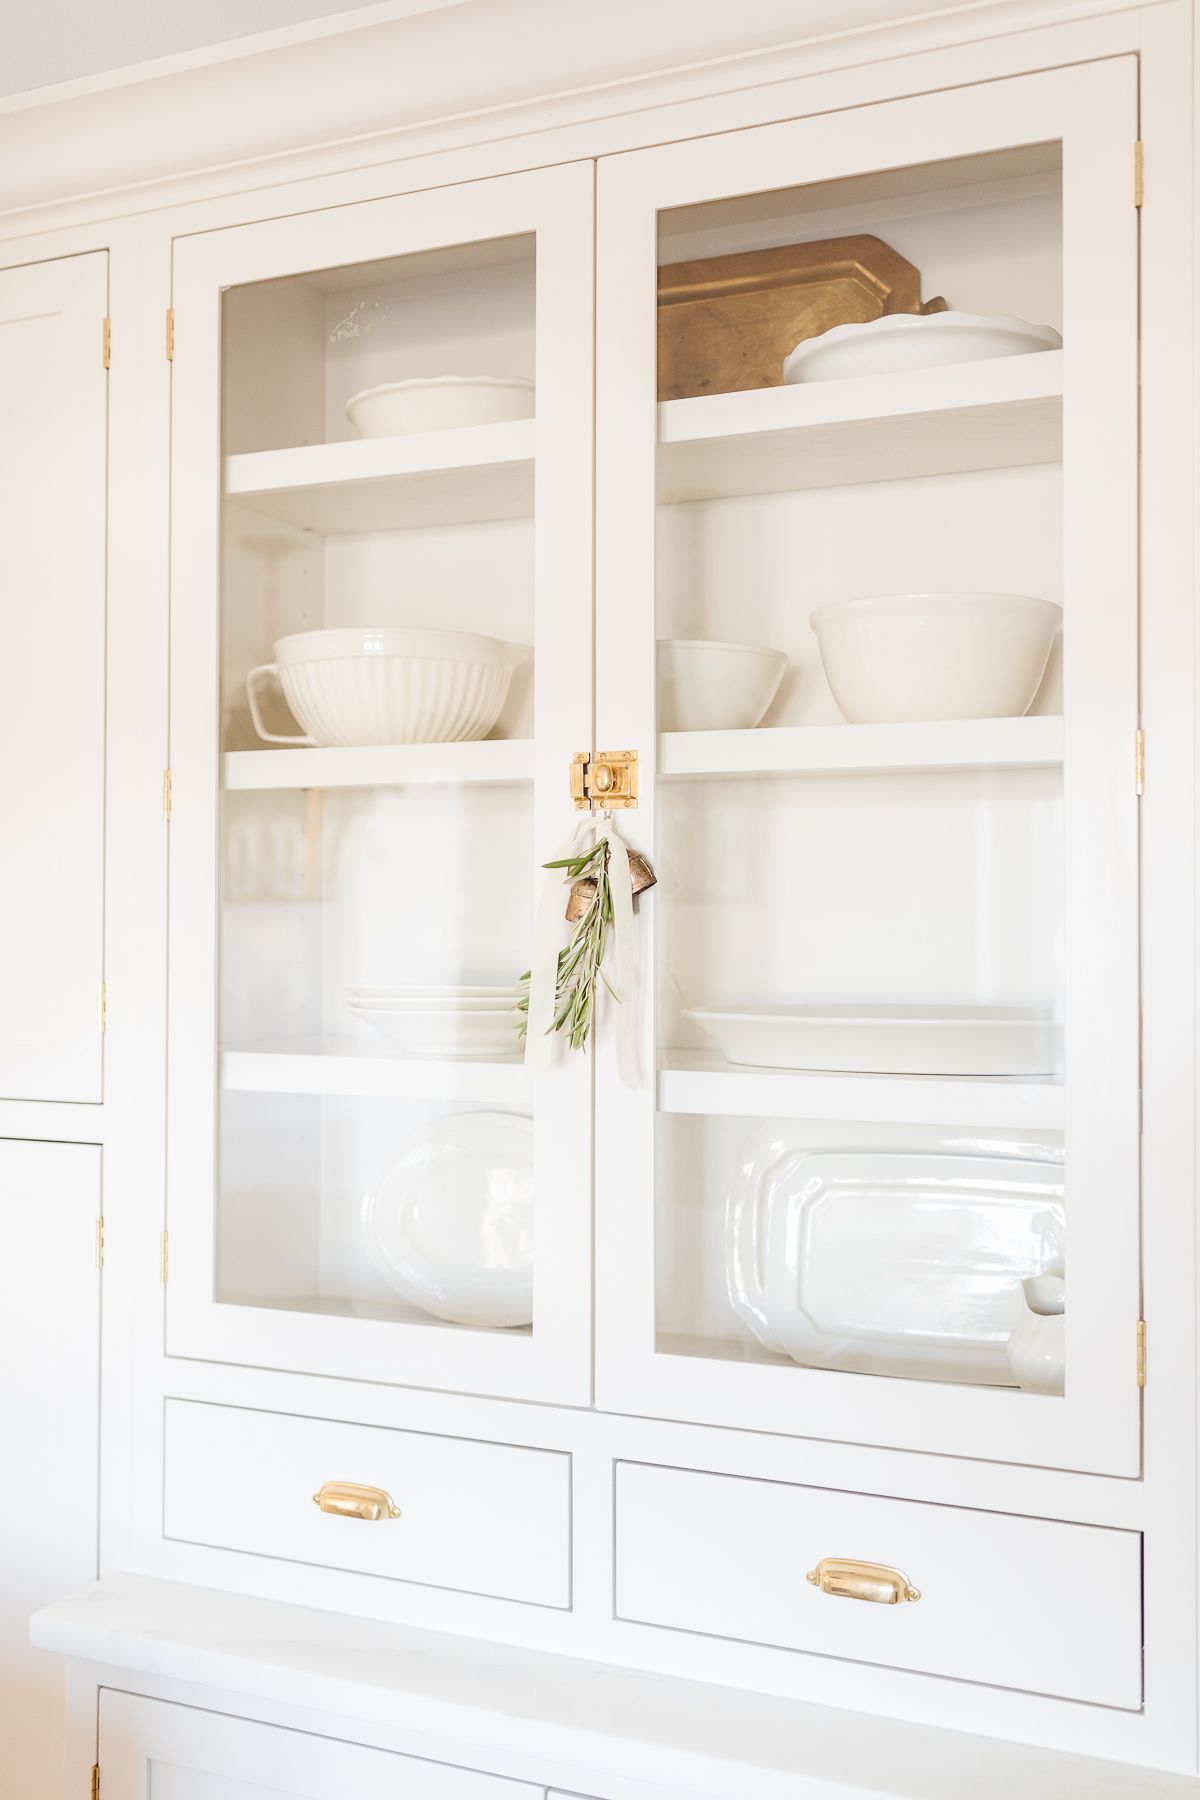 A kitchen cabinet with glass doors and brass cabinet latches